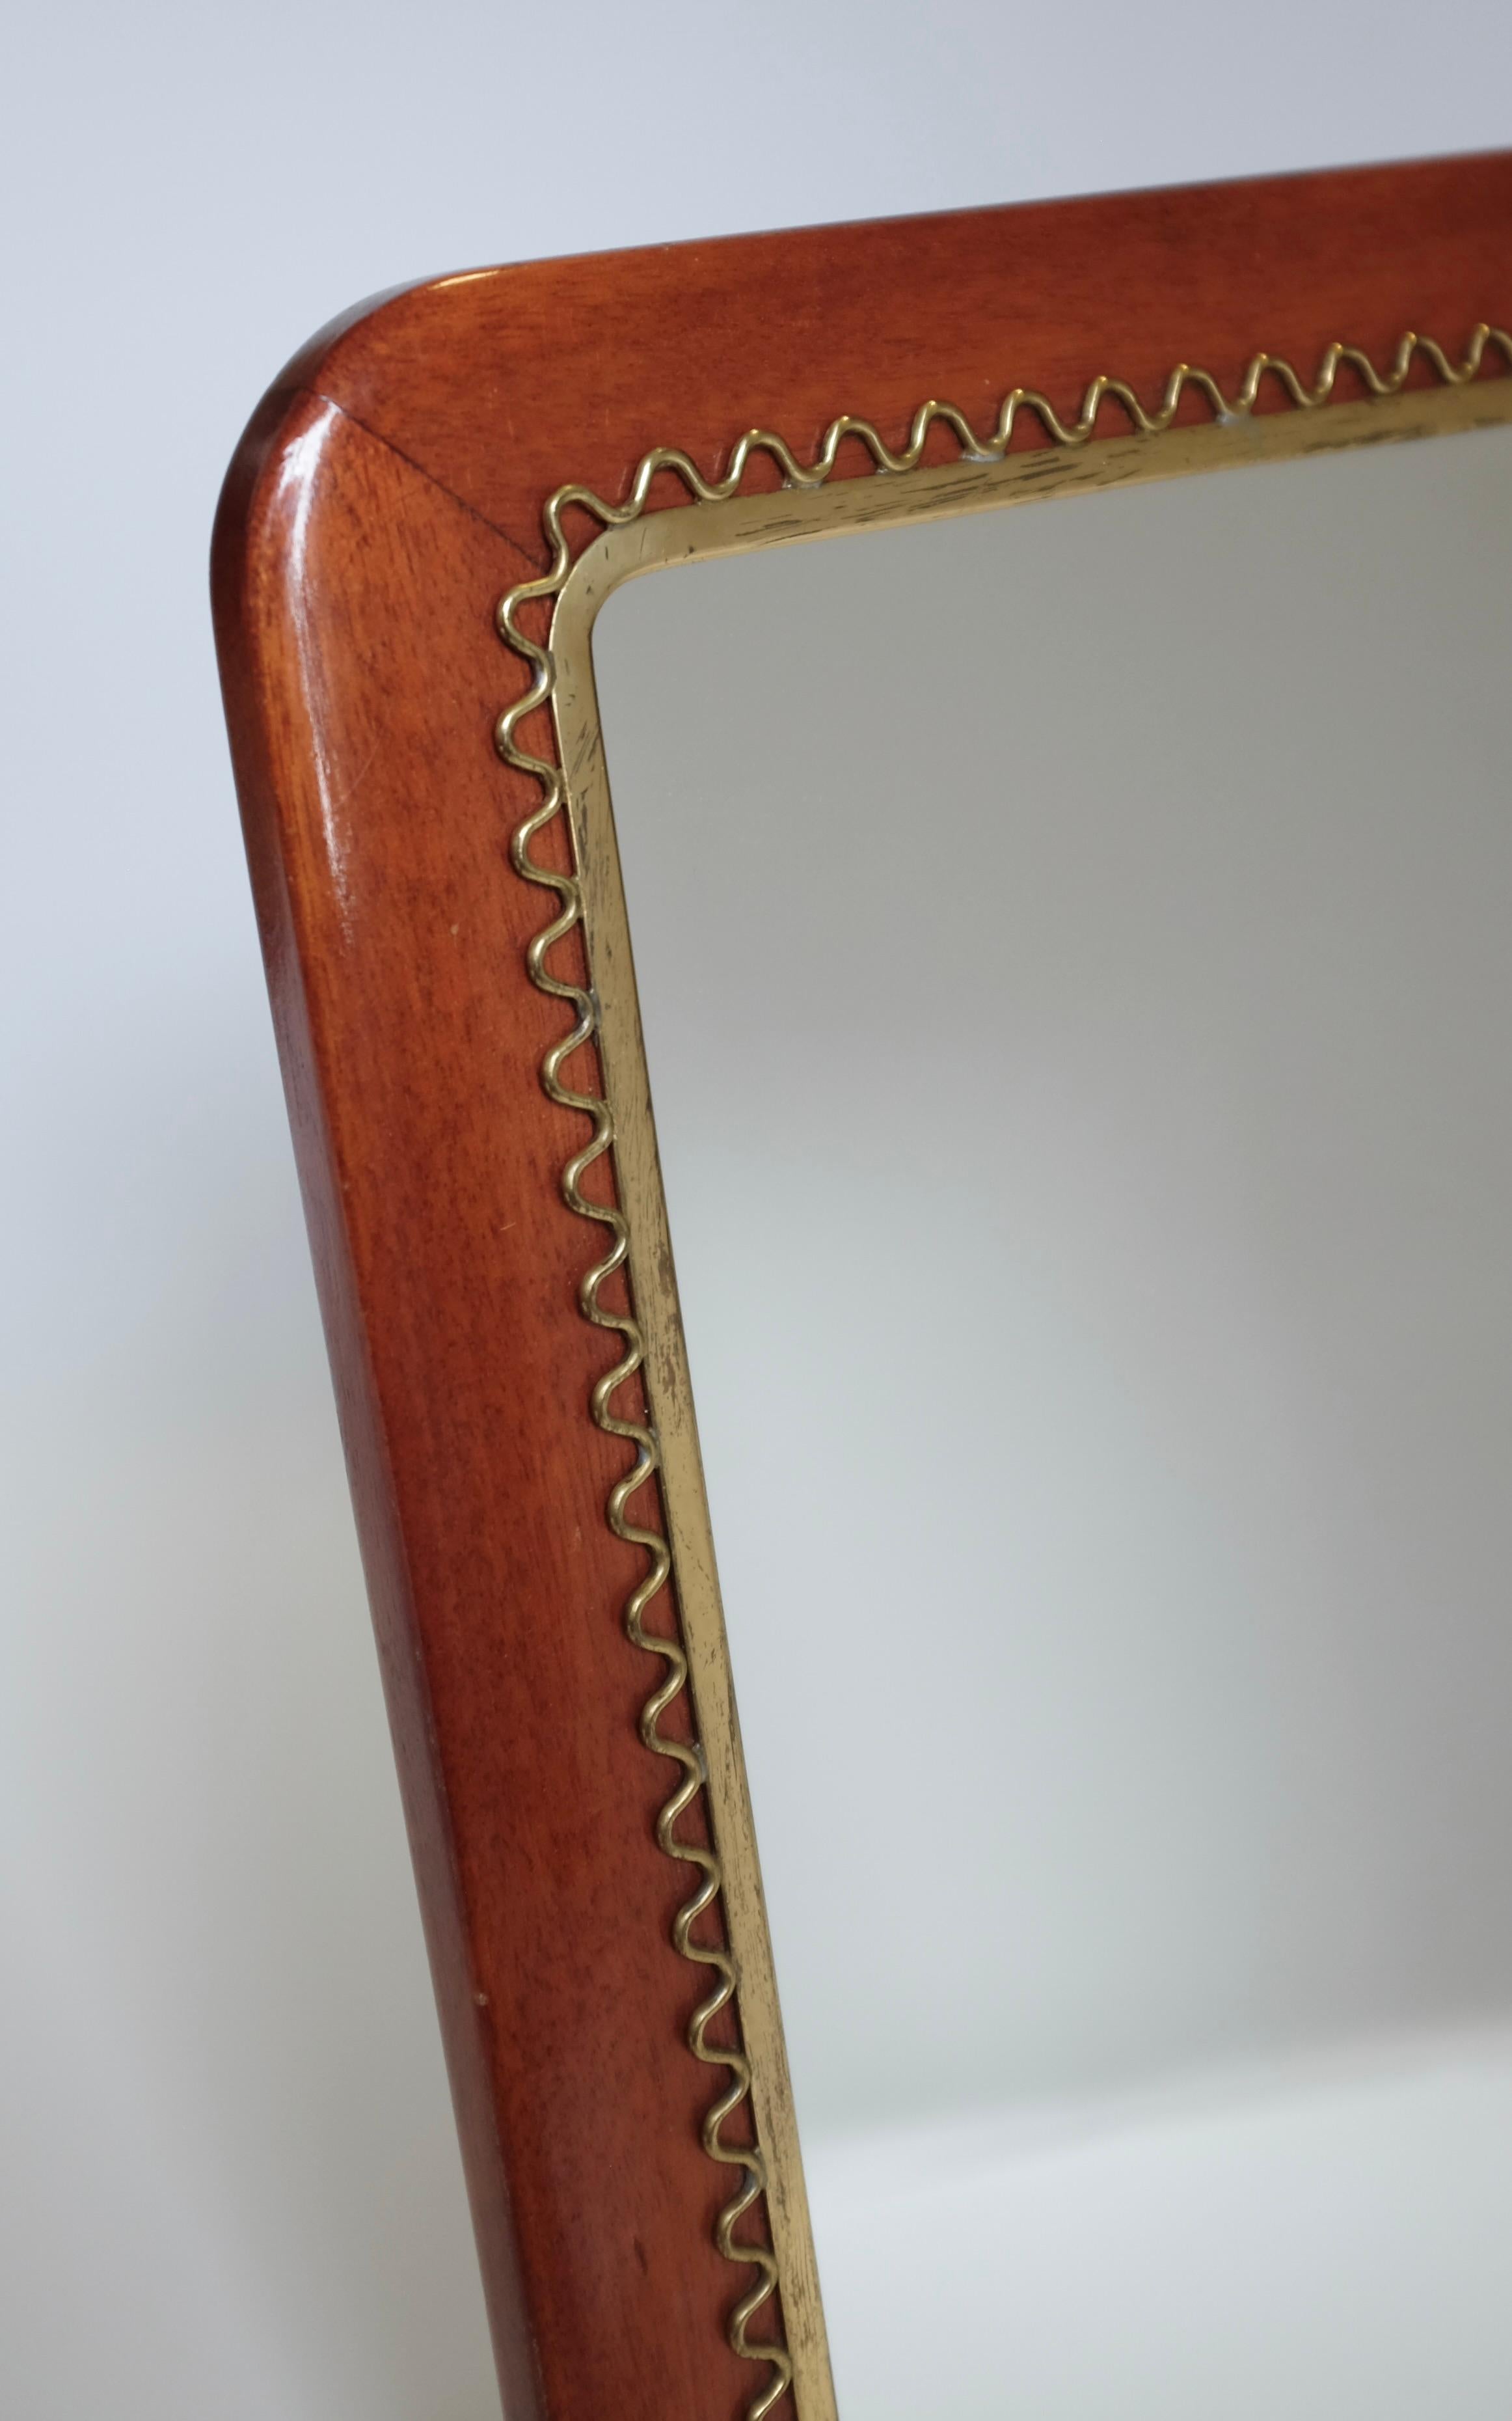 Beautiful Swedish Modern brass and mahogany mirror in the style of Josef Frank and Svenskt Tenn. Filigree details goes around the glass in brass with a Mahogany frame in a rectangular shape. Can be used as a table mirror as well as a wall mirror.